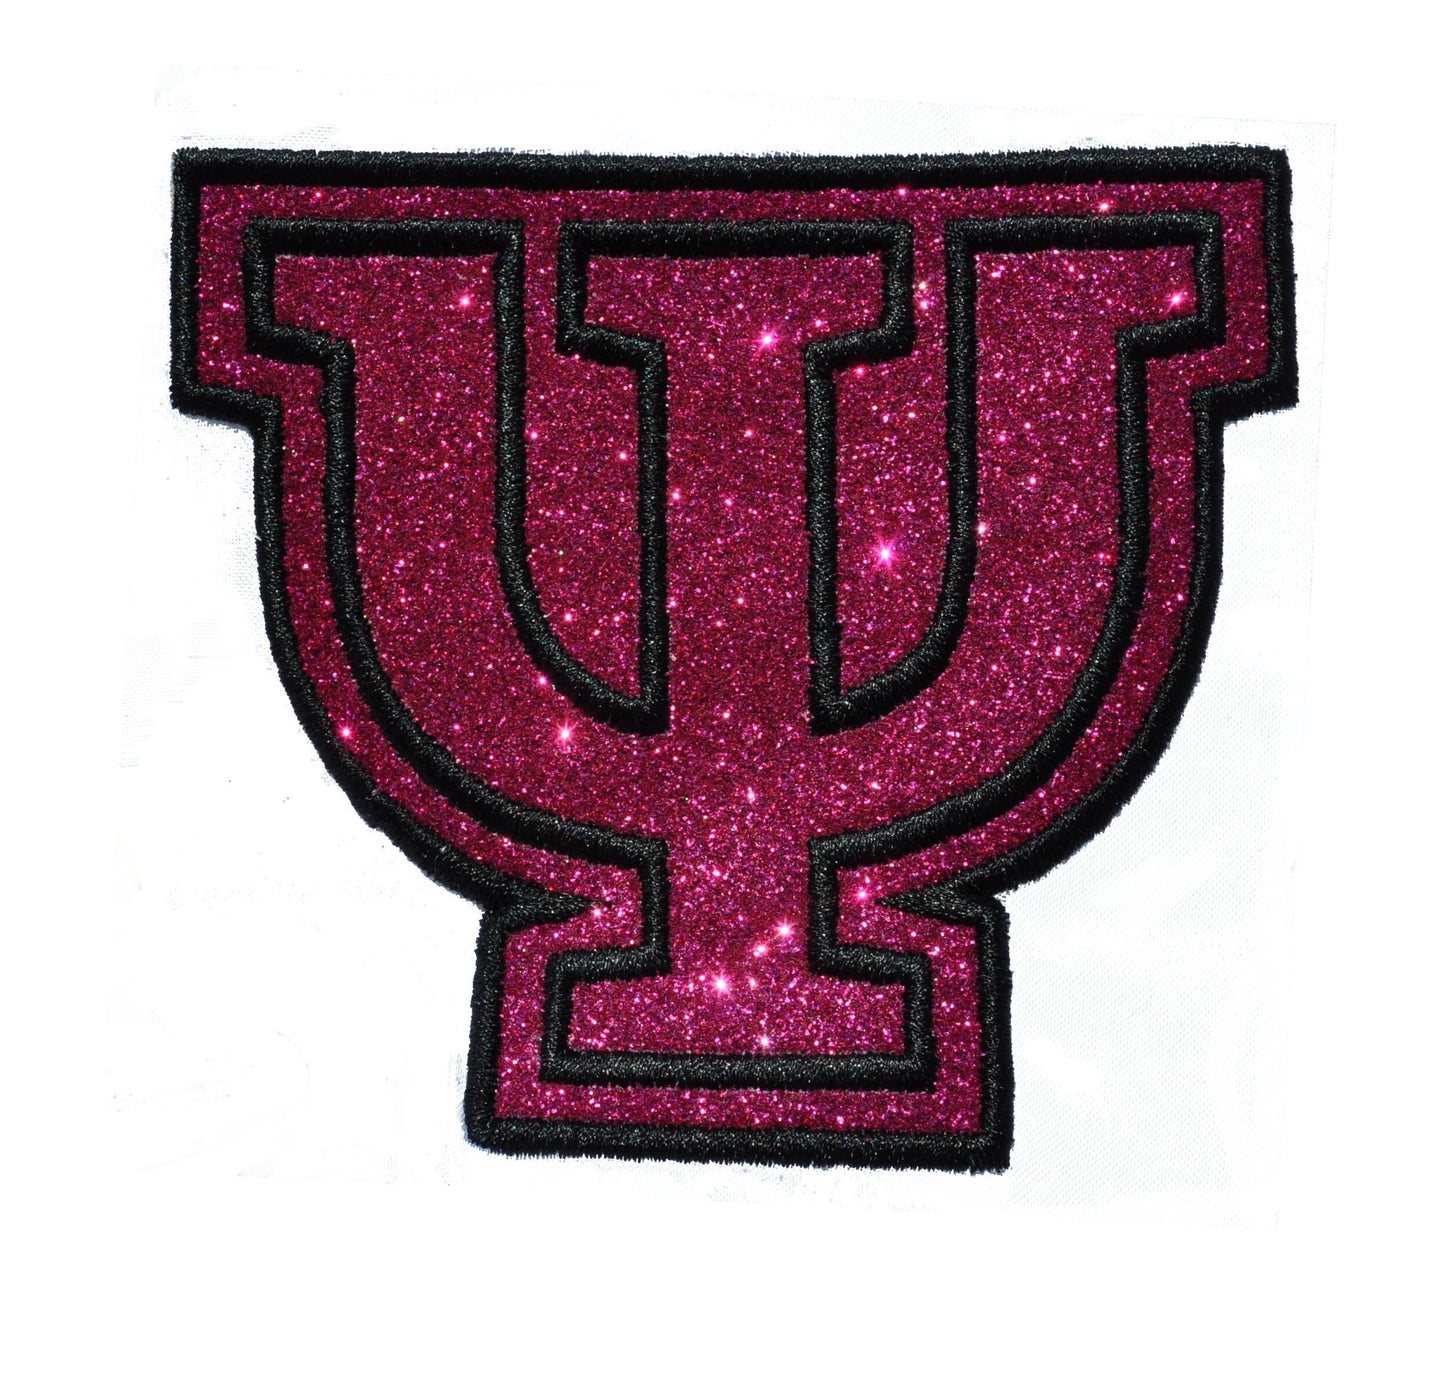 Greek Athletlic Sorority or Fraternity two Outline Stitch Letter Font Vinyl Glitter rush pledge Iron or Sew on Patch NO GLITTER MESS GL222